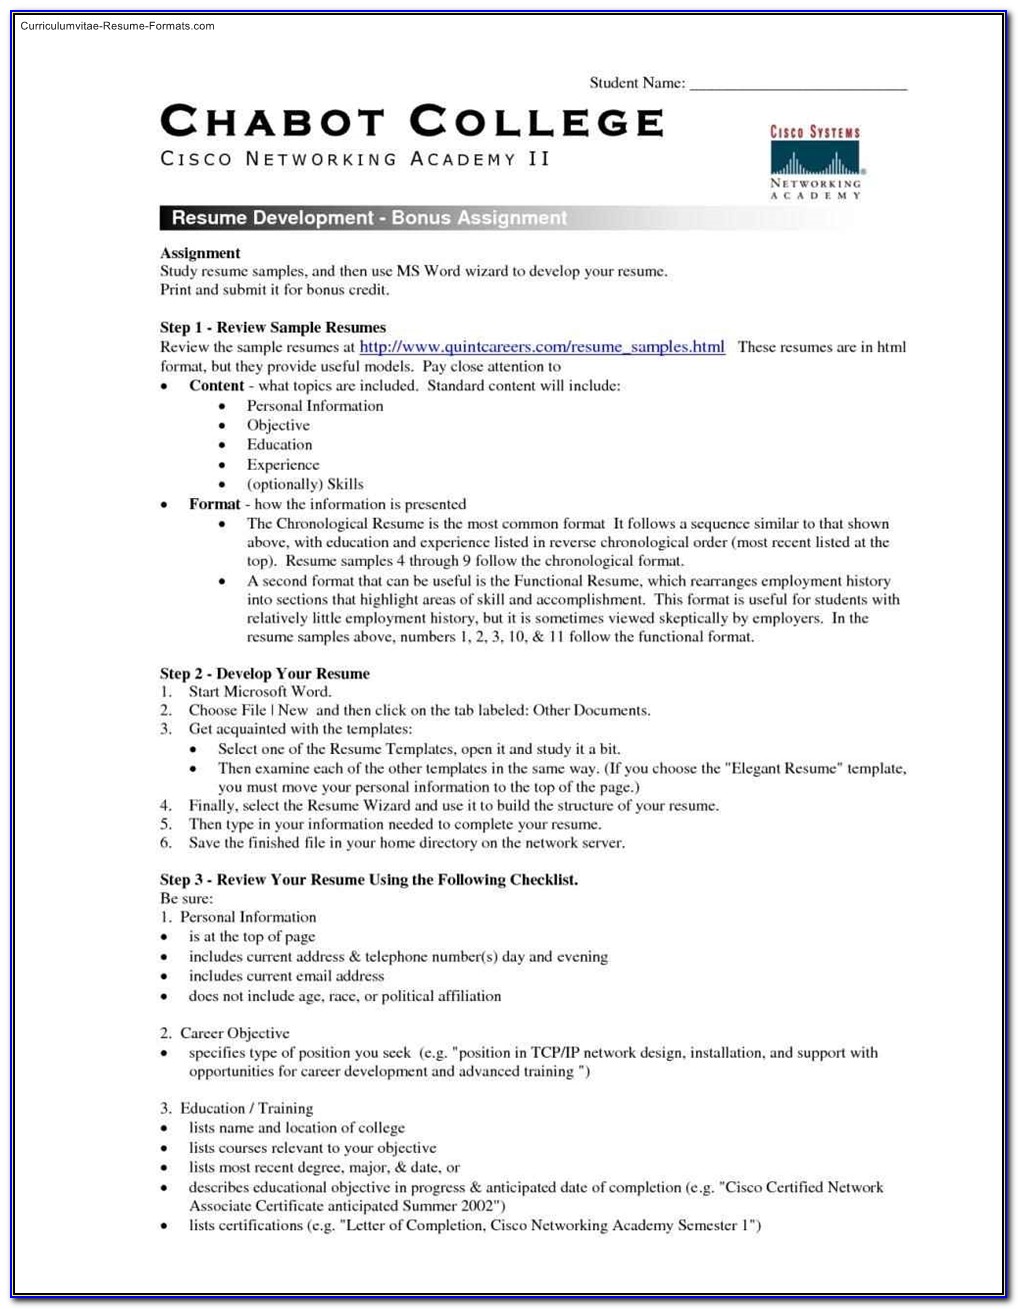 Free Resume Builder For College Students